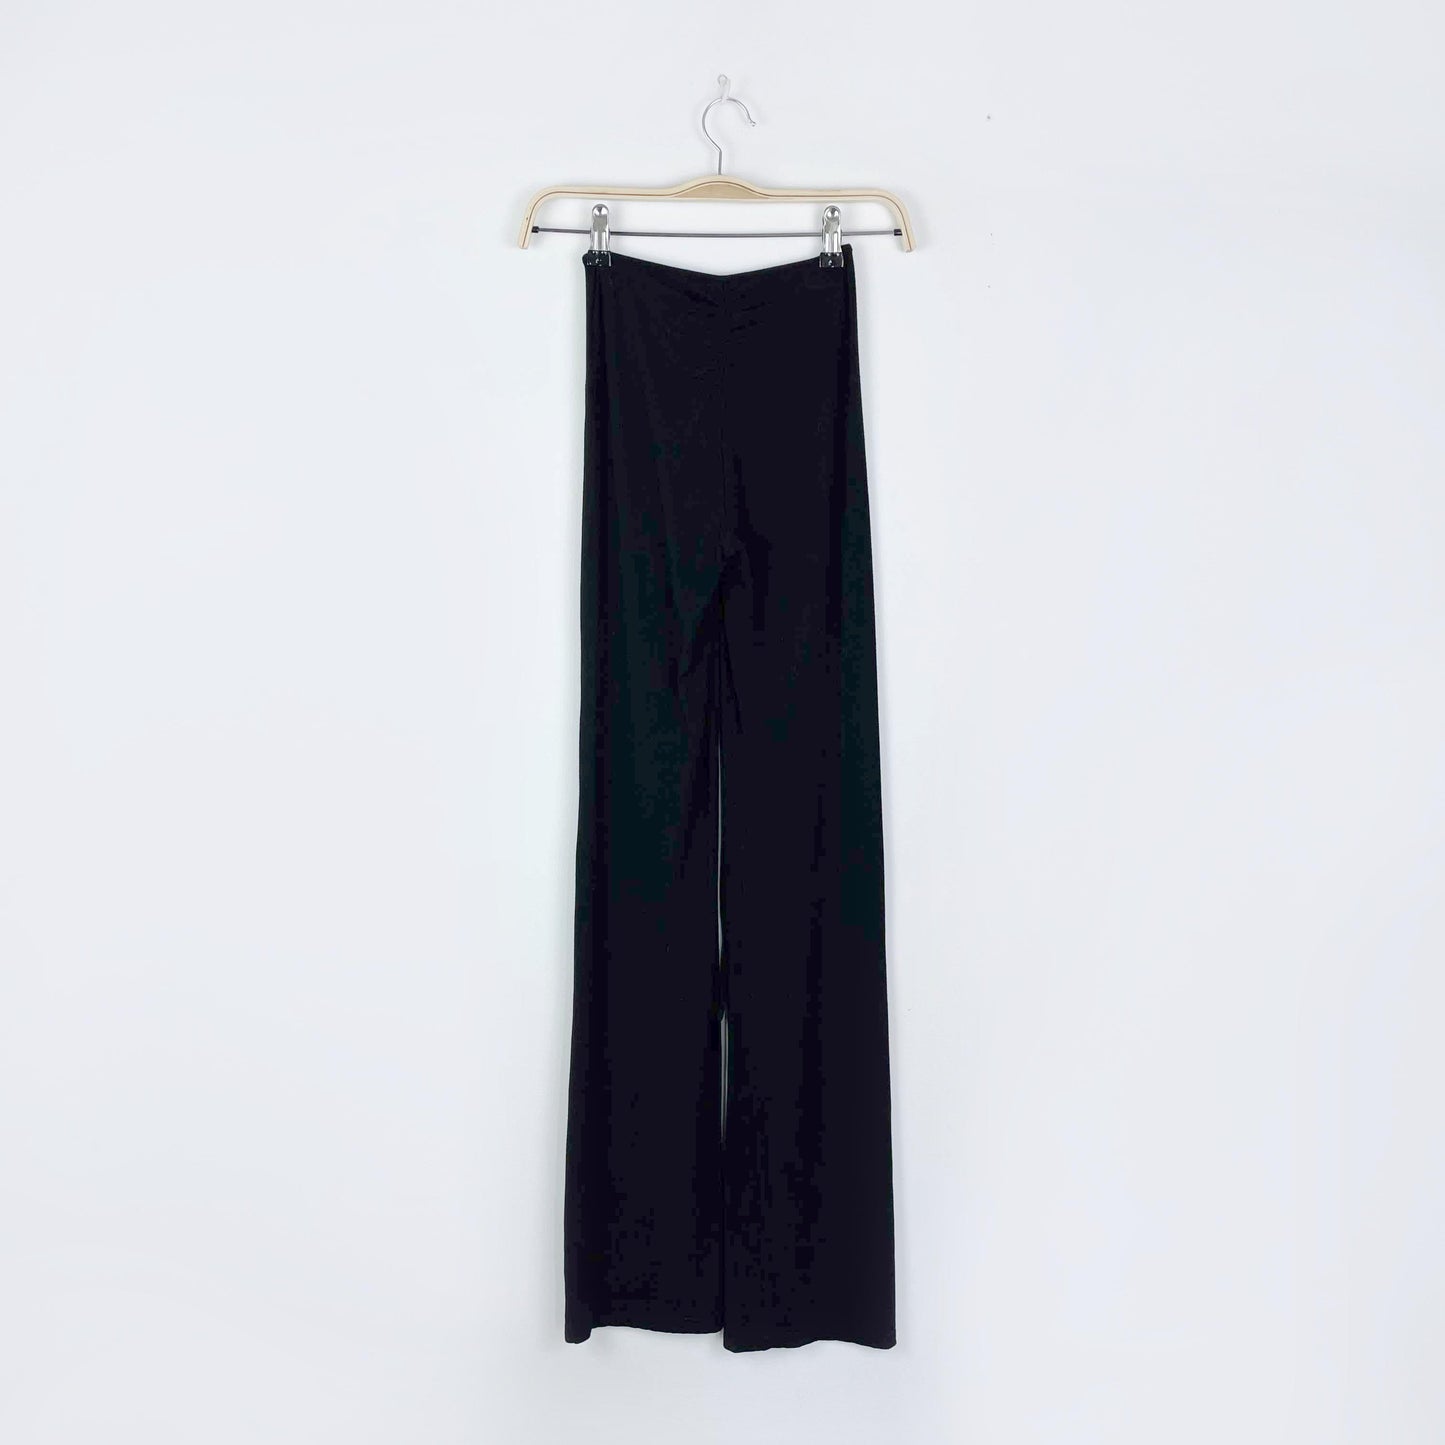 i.am.gia halo bamboo ruched tie pants - size xxs